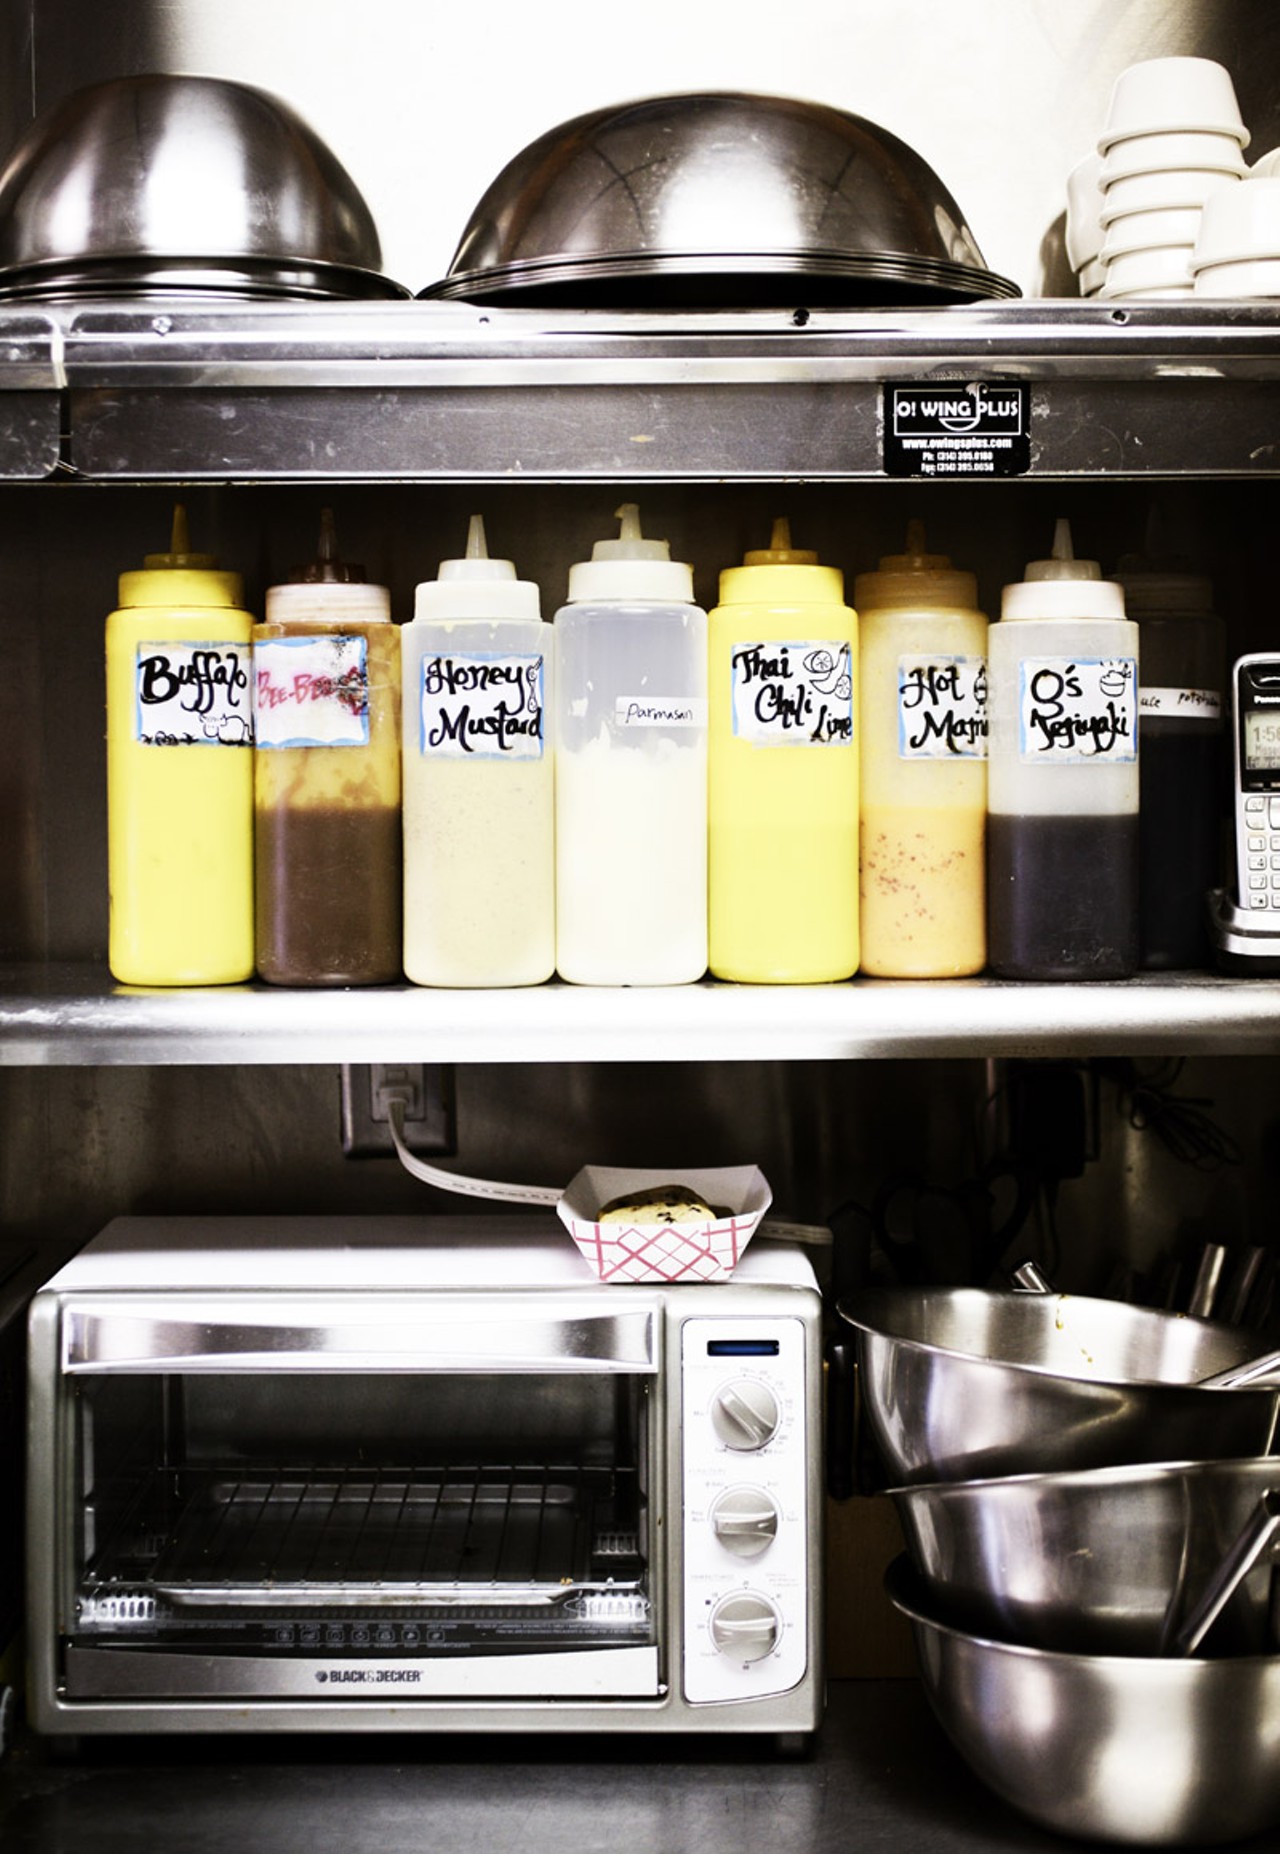 Owner Heidi Song makes all the sauces (except the BBQ sauce) from scratch.